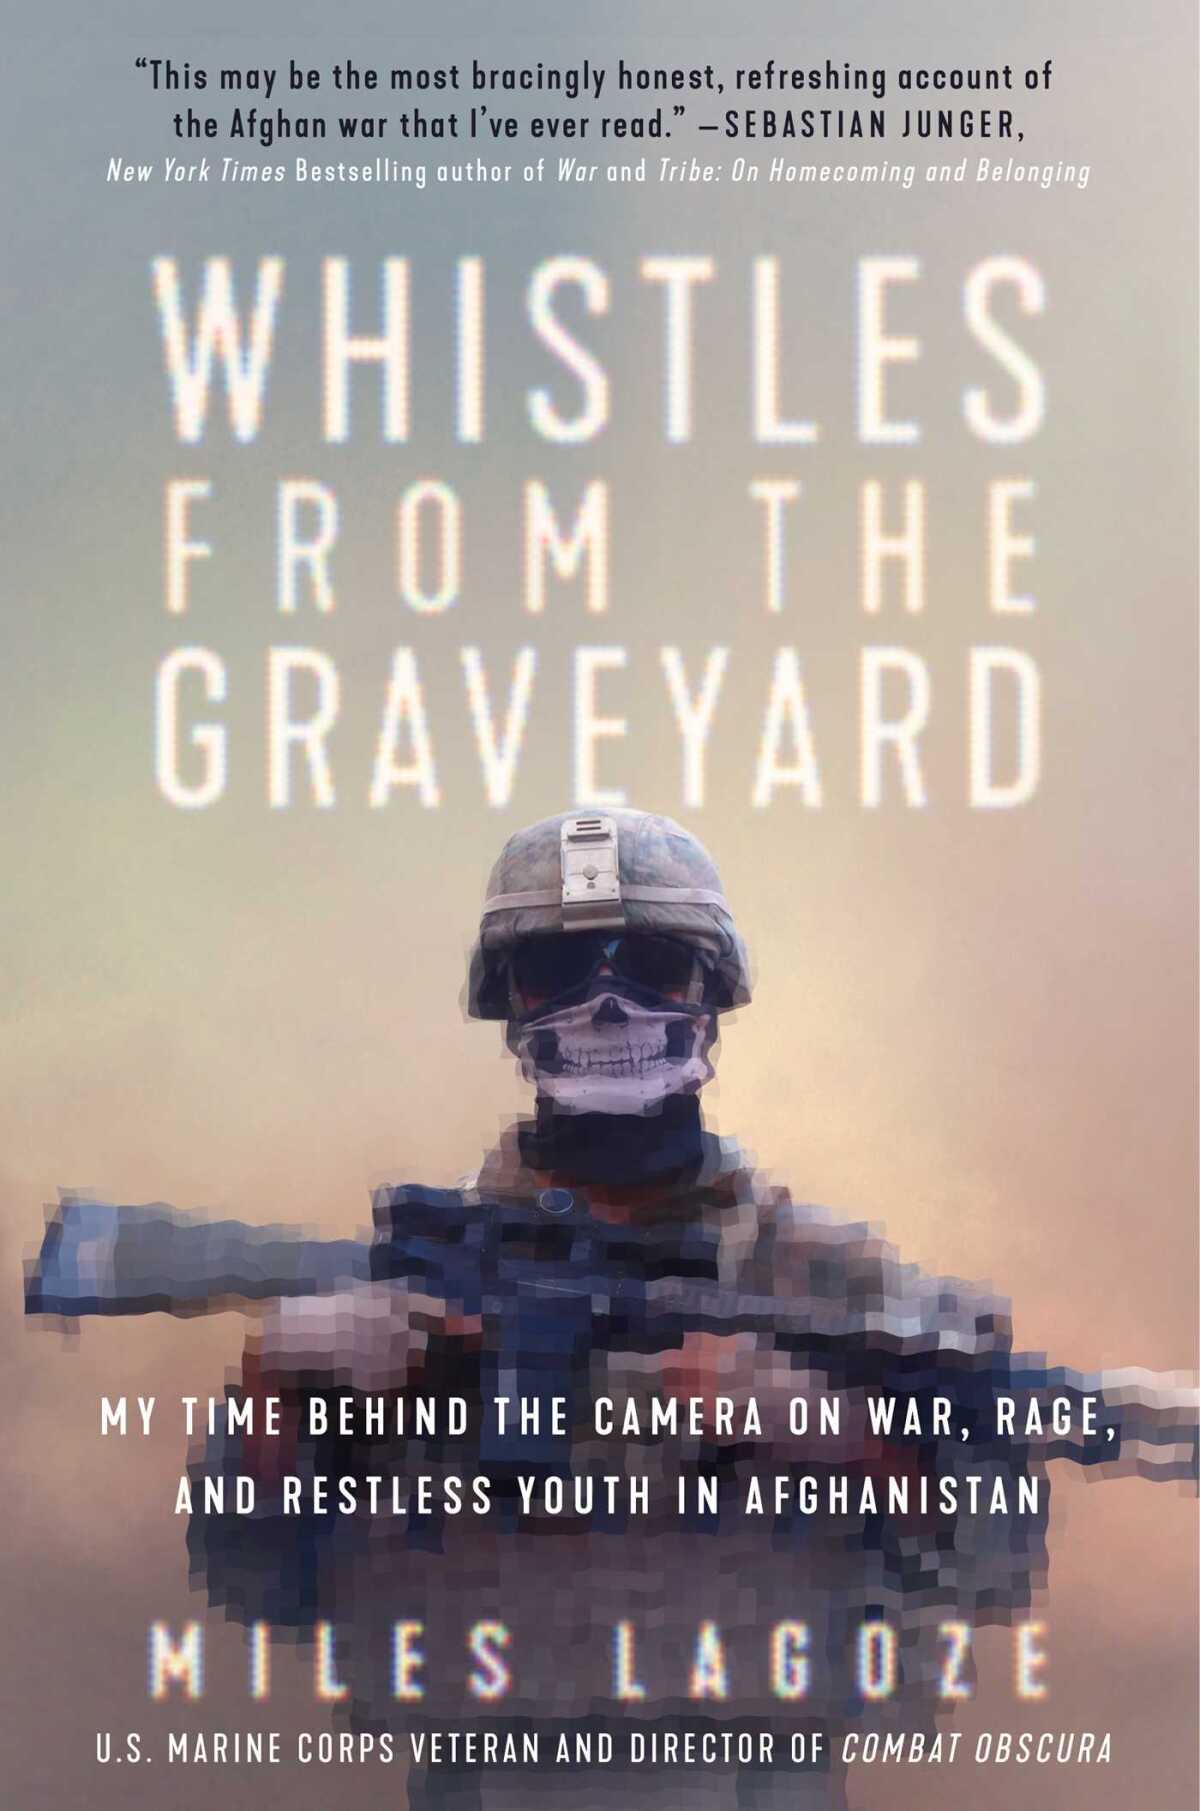 The cover of the book "Whistles From the Graveyard," by Miles Lagoze, shows a soldier with a skull for a face